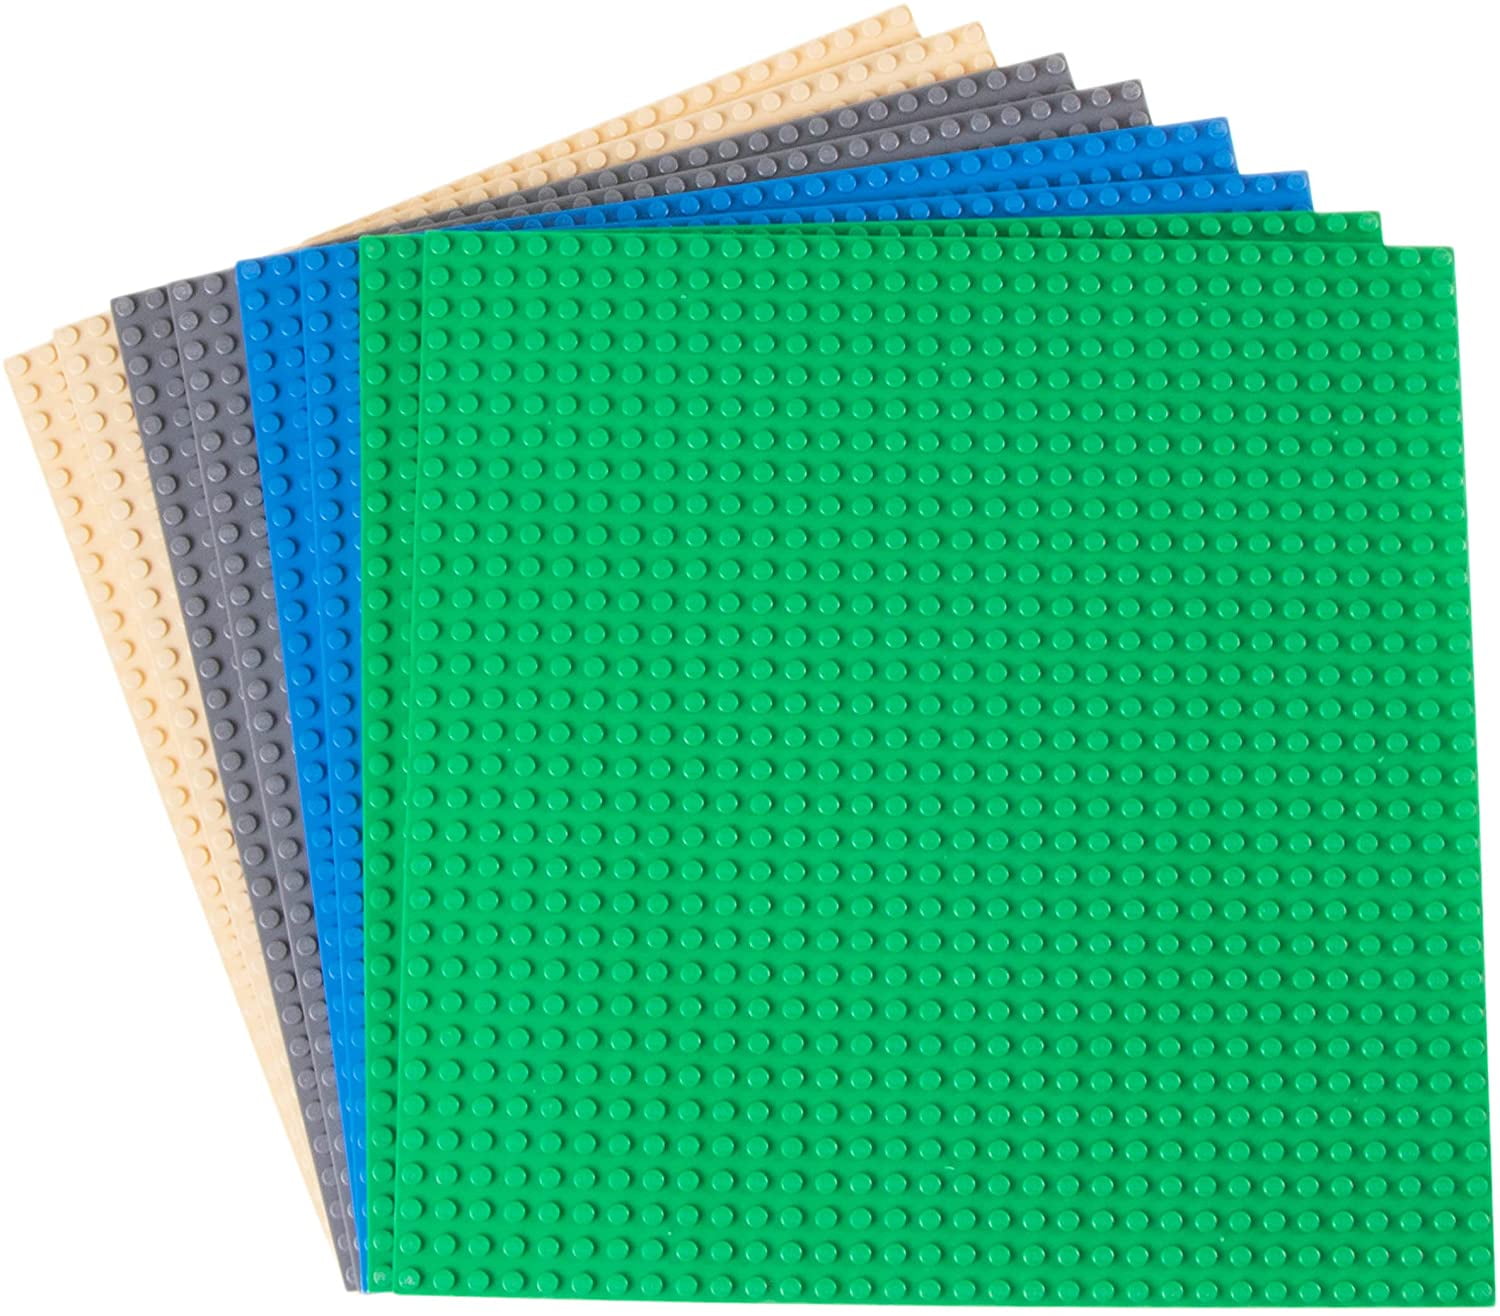 Green Base Plate 10x10-inch 32x32-stud compatible For LEGO Building Bricks Sets 